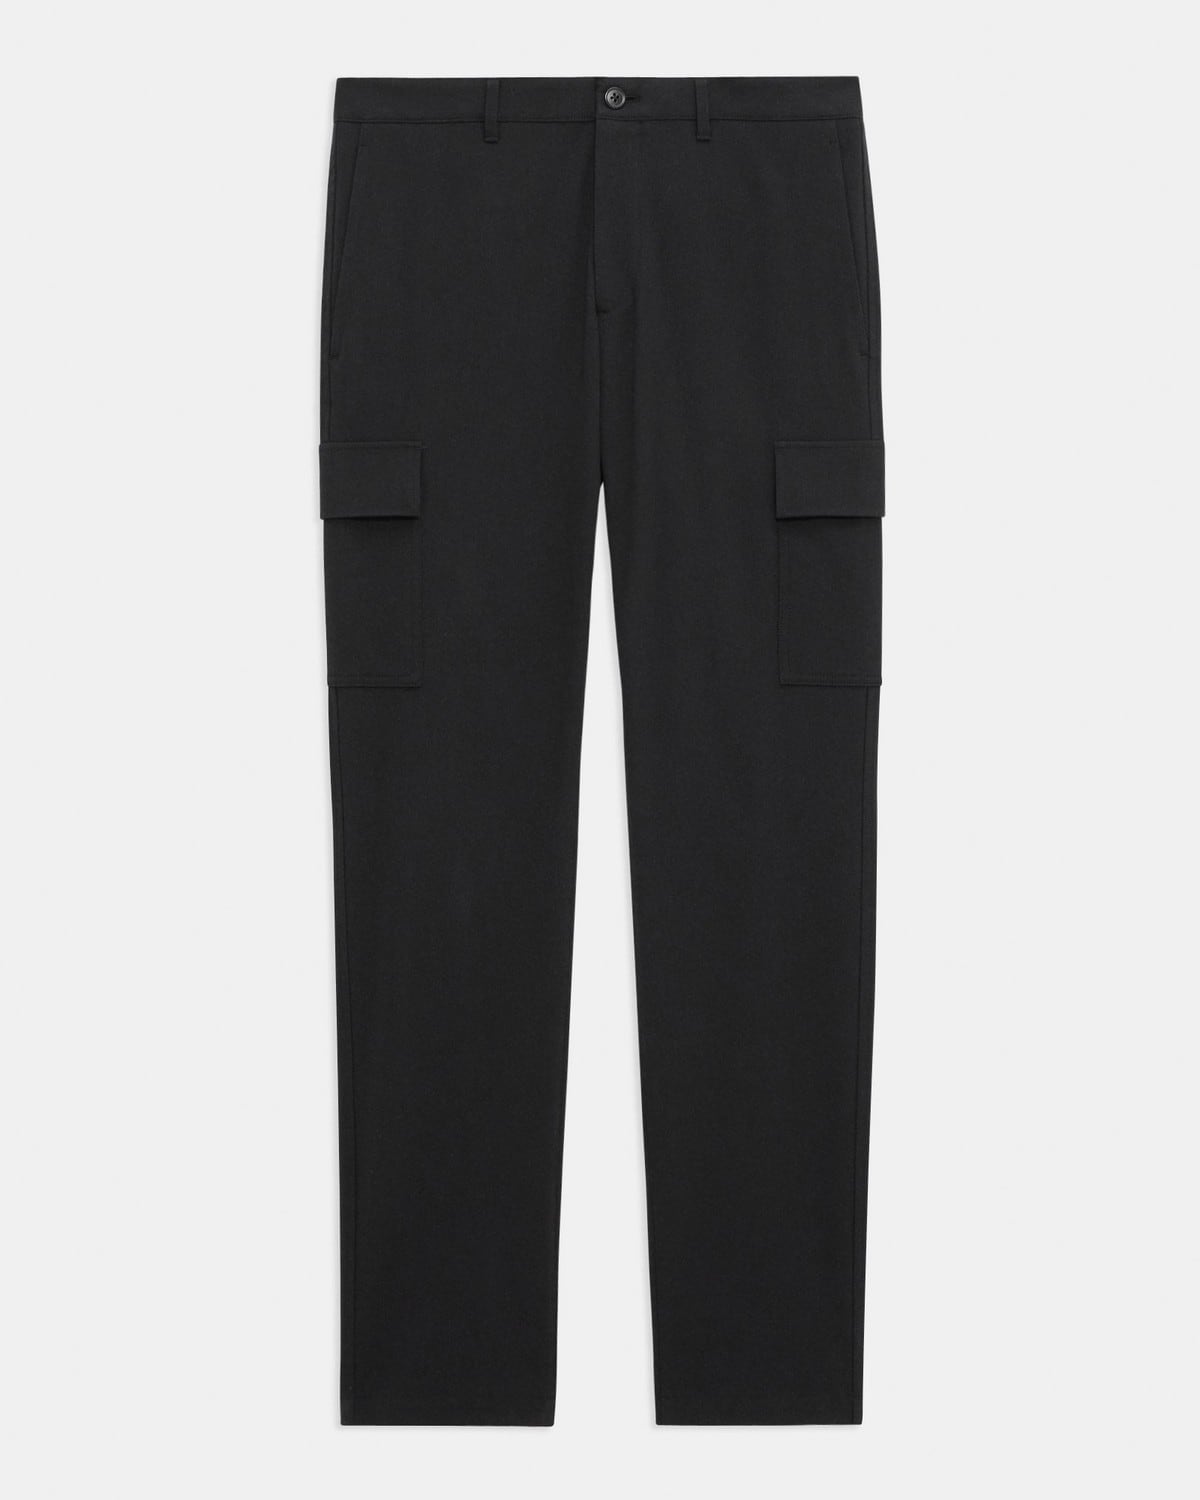 Zaine Cargo Pant in Neoteric Twill